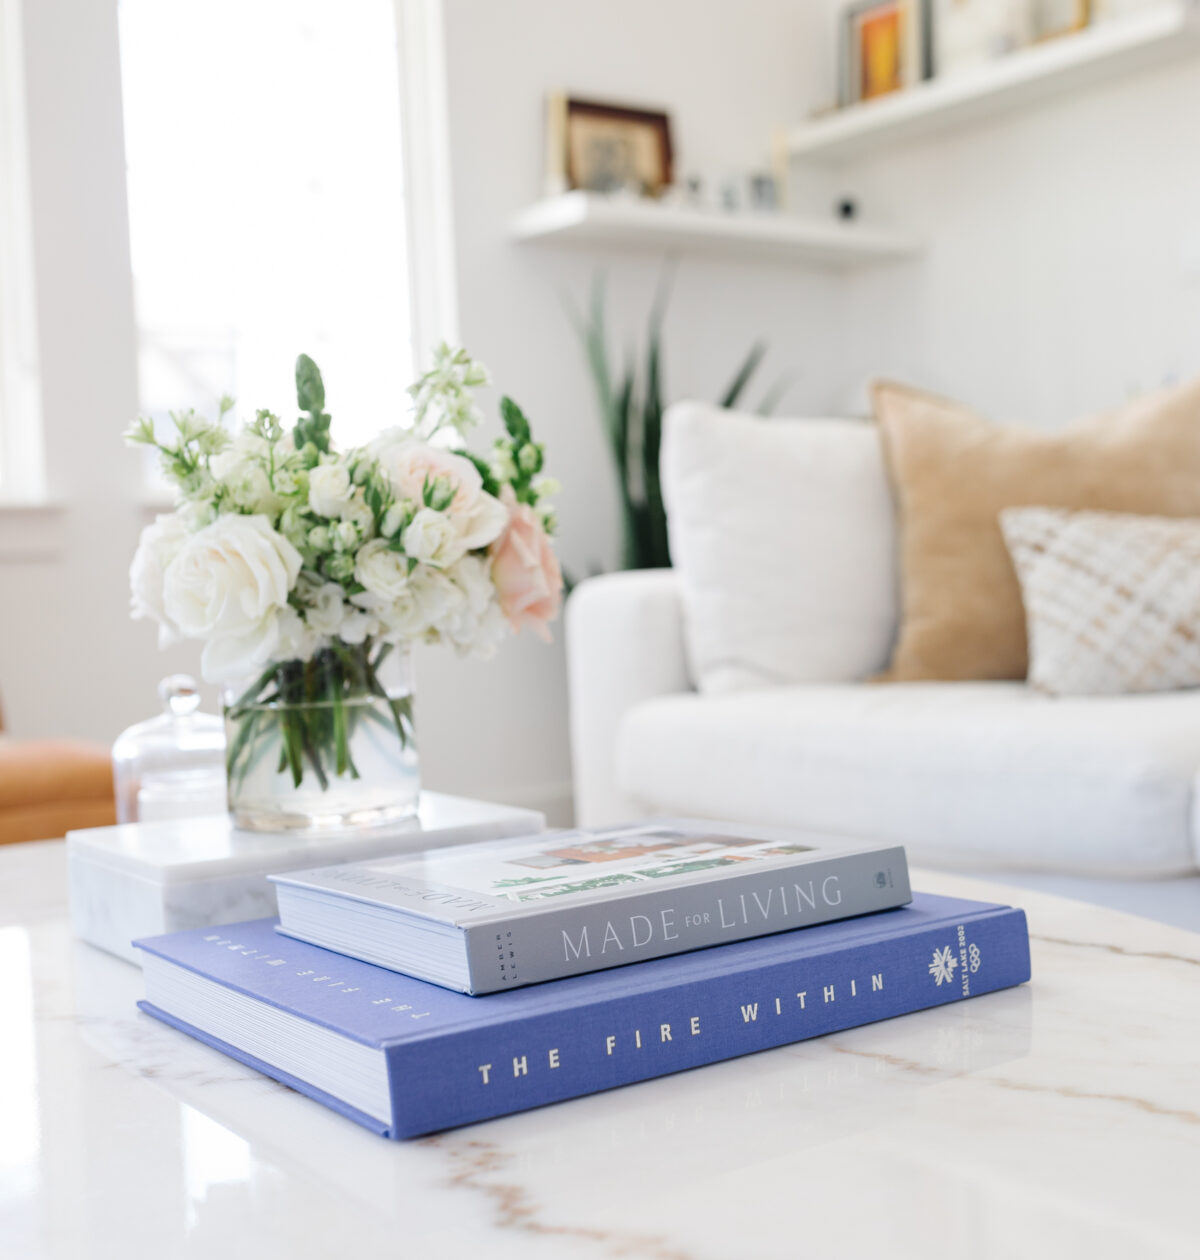 Blogger Hoang-Kim Cung's living room in her transitional style home with a marble coffee table, coffee table books, and flowers